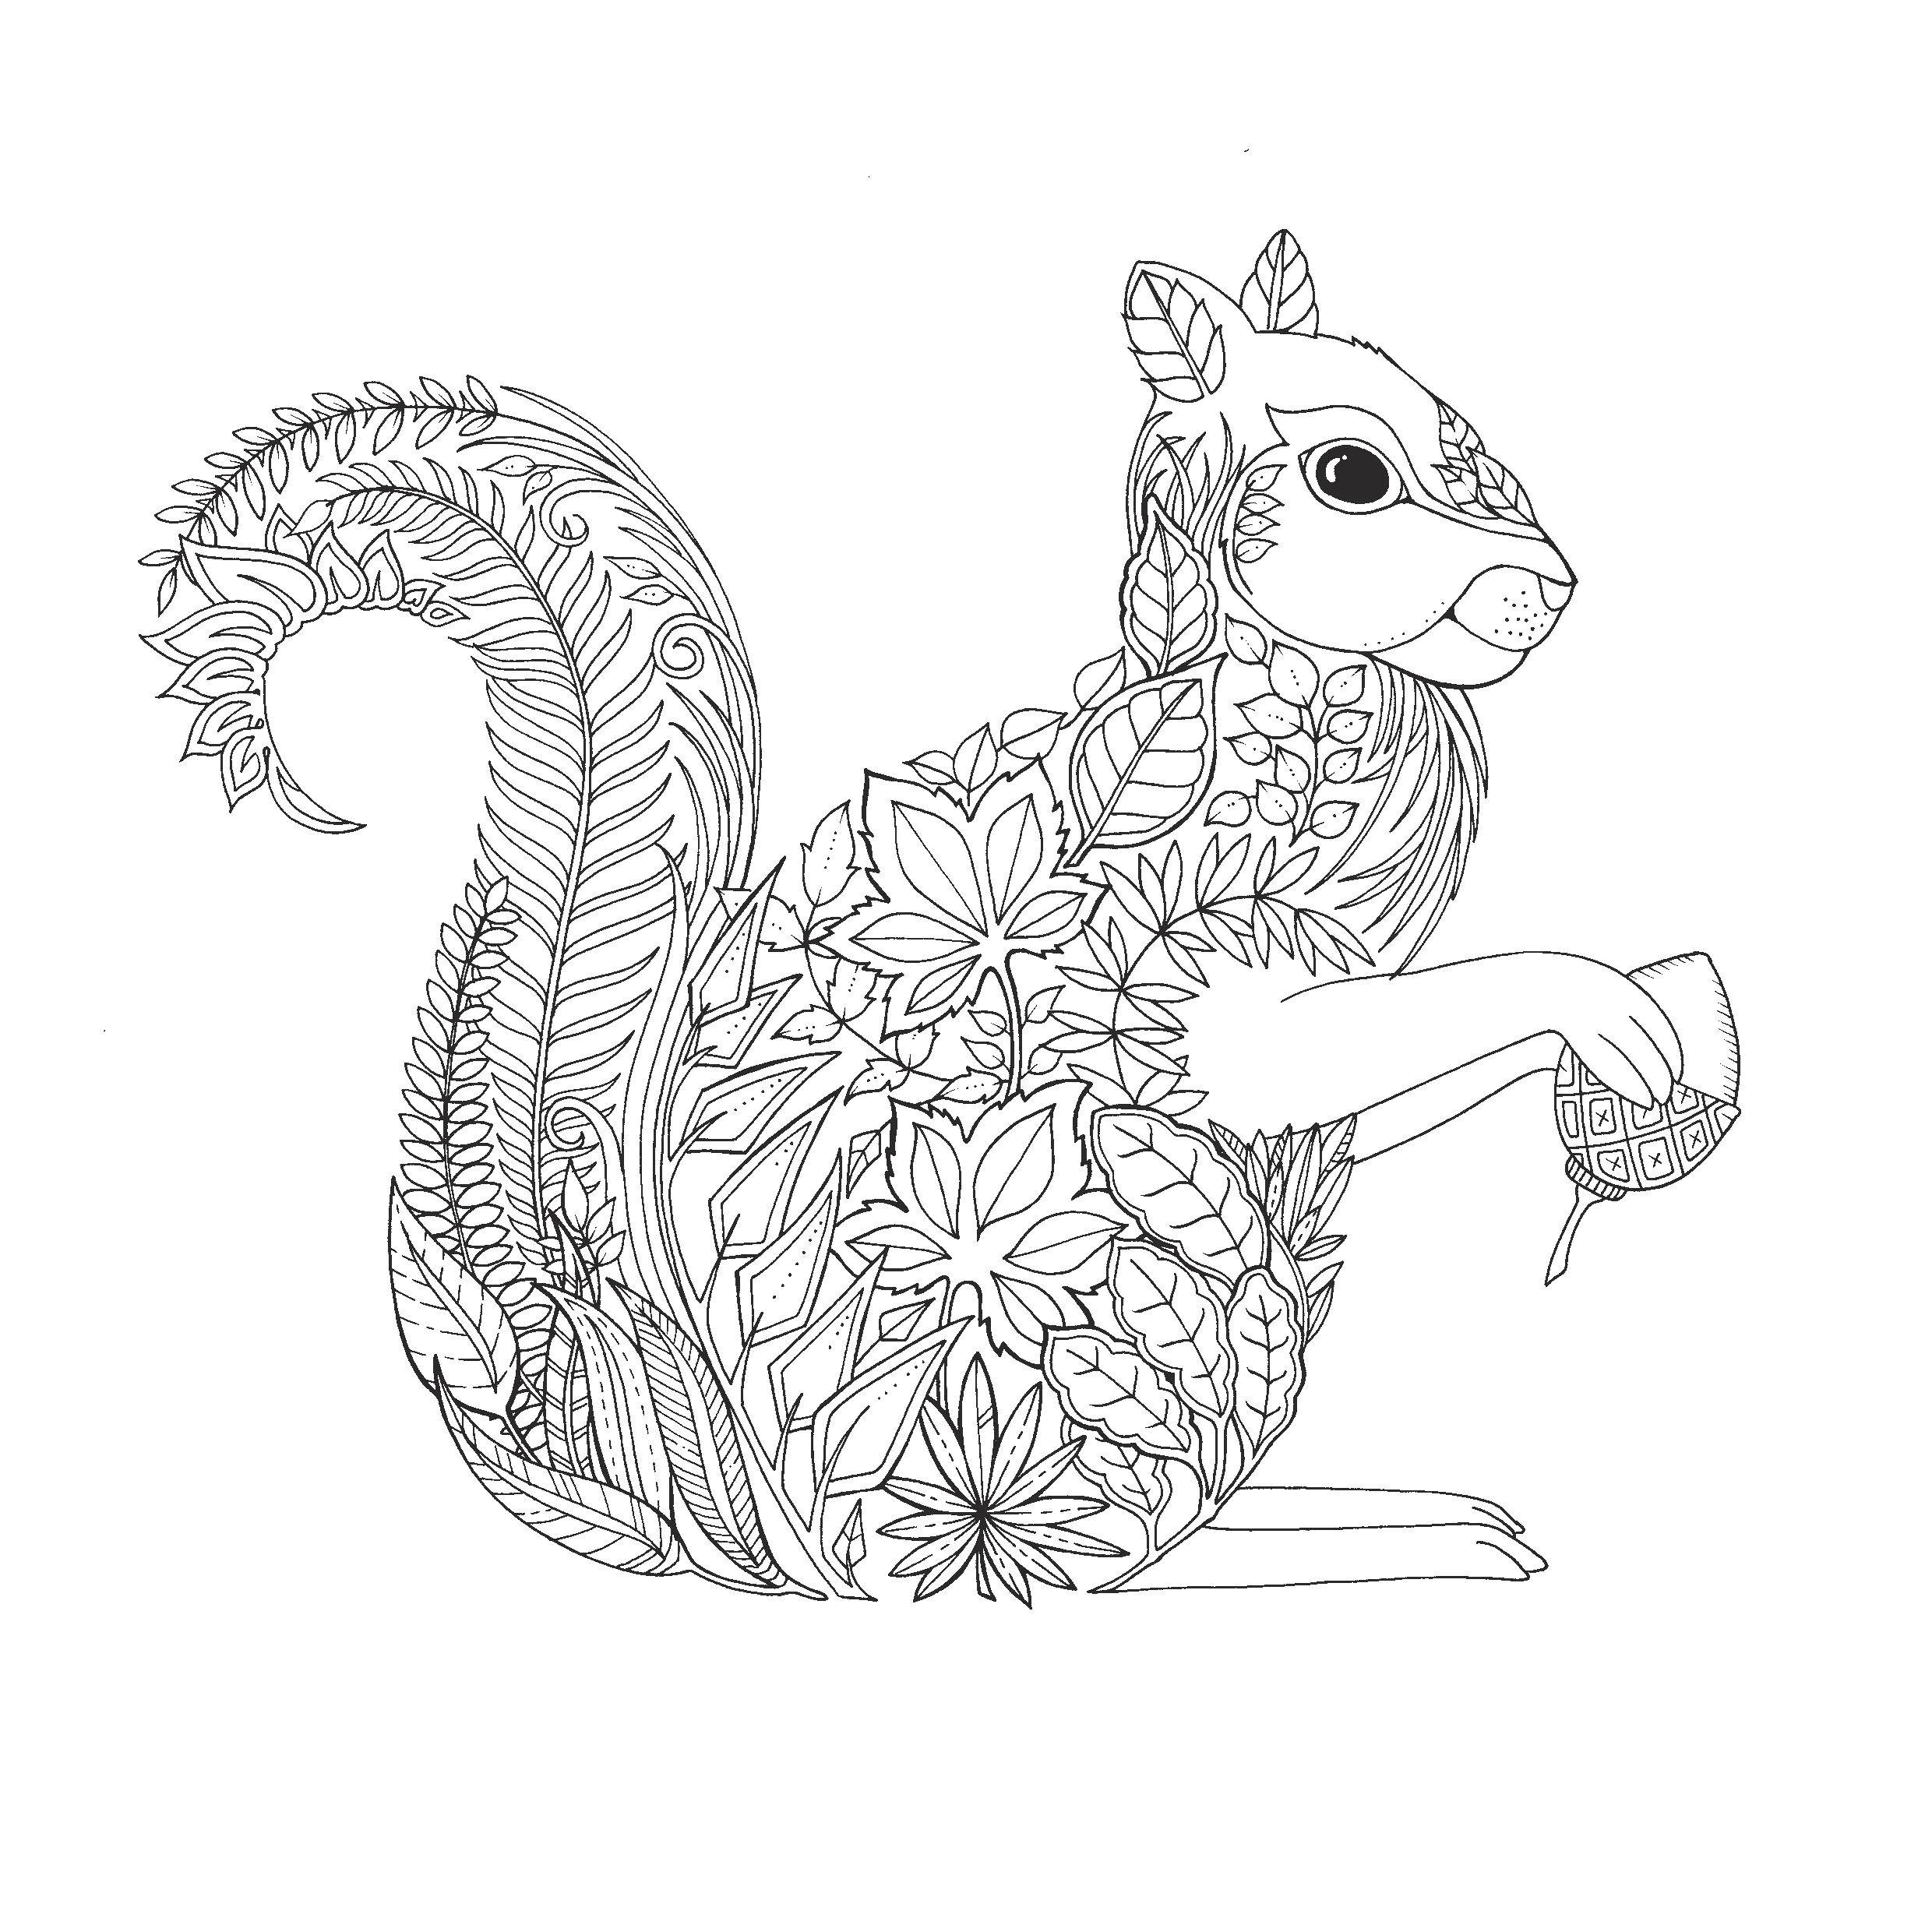 Coloring Patterned squirrel with nut. Category patterns. Tags:  Patterns, animals, ethnic.